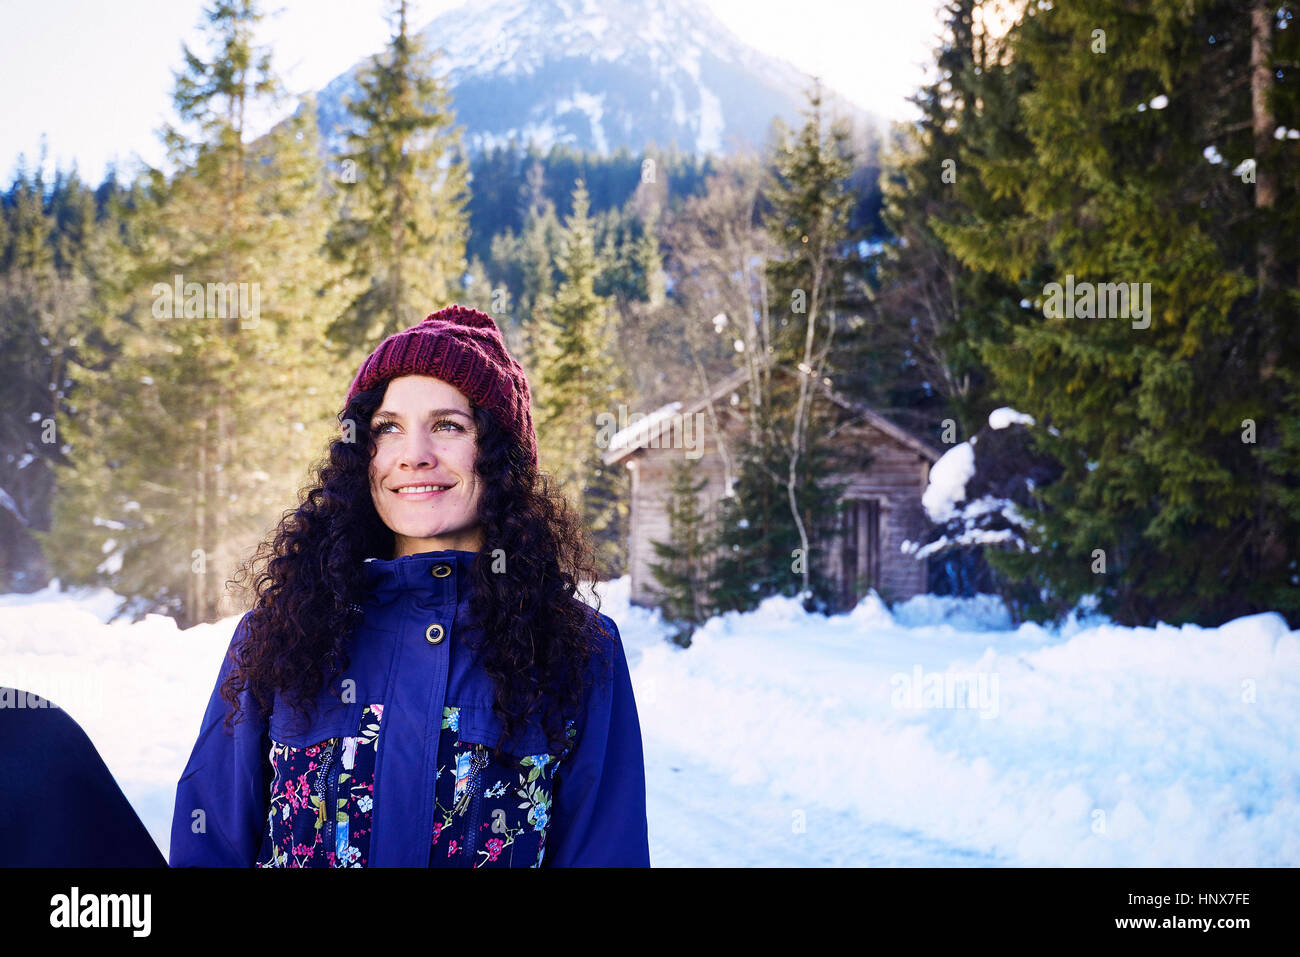 Woman in knit hat gazing by snowy forest, Austria Stock Photo